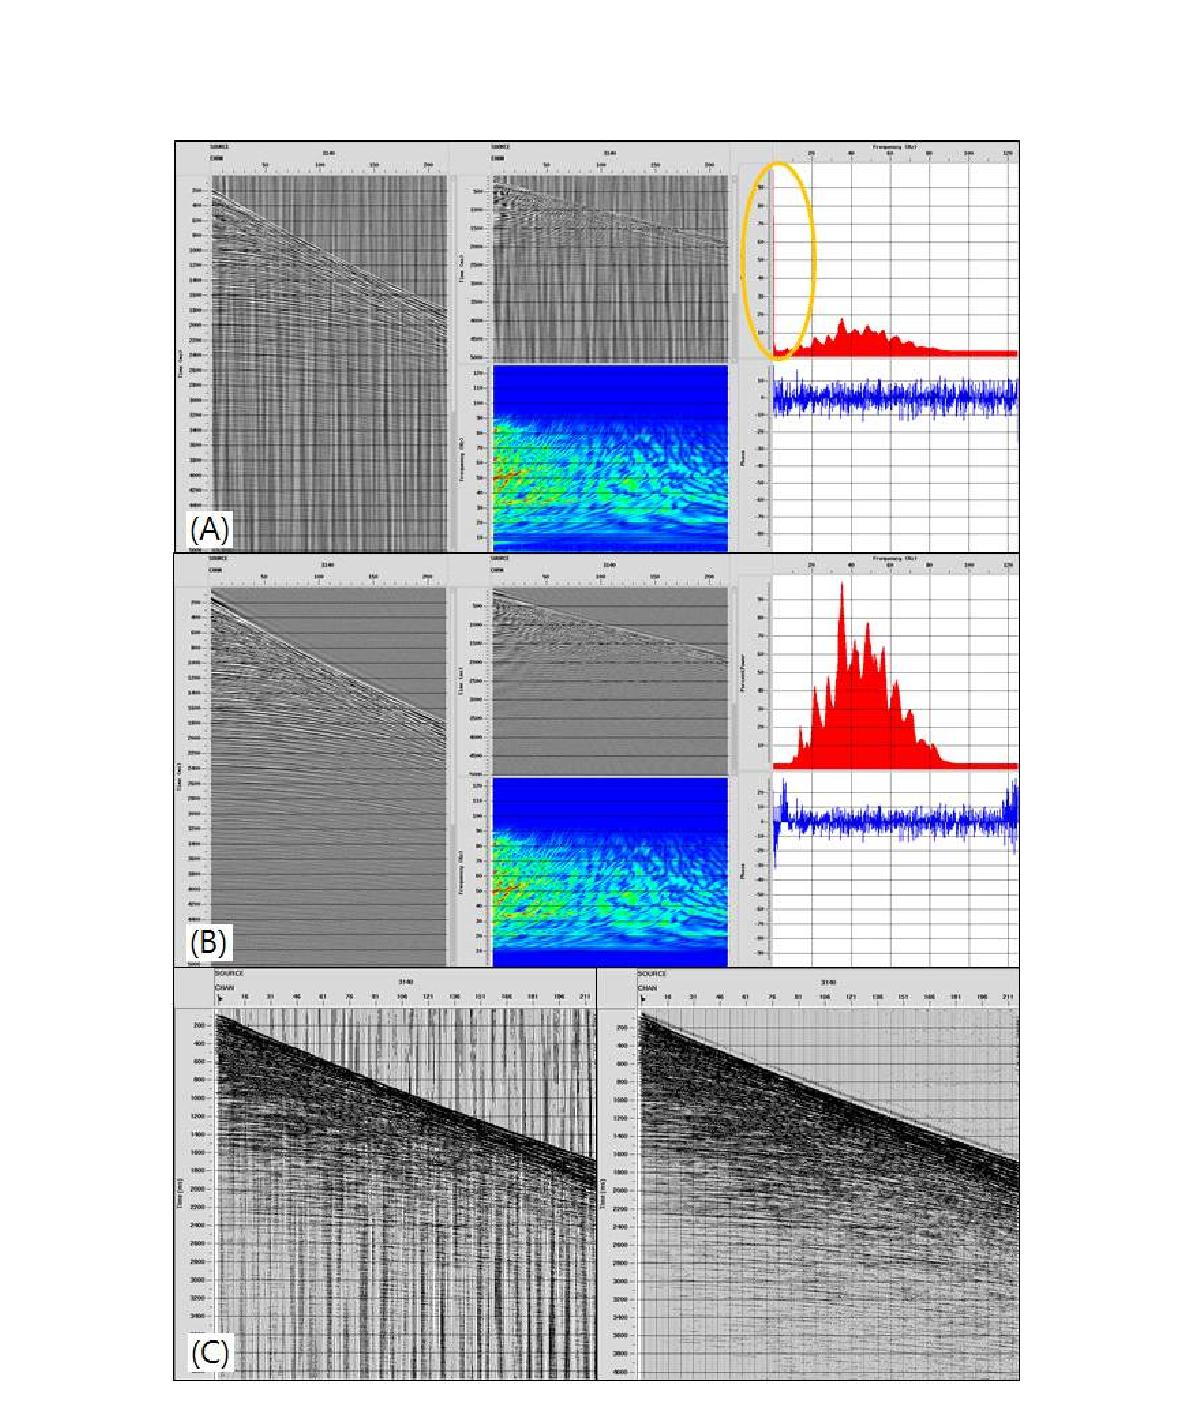 (a) Amplitude spectrum analysis in shot gather, (b) Amplitude spectrum analysis after removing low frequency noise, (c) Shot gather before and after applying bandpass filter.